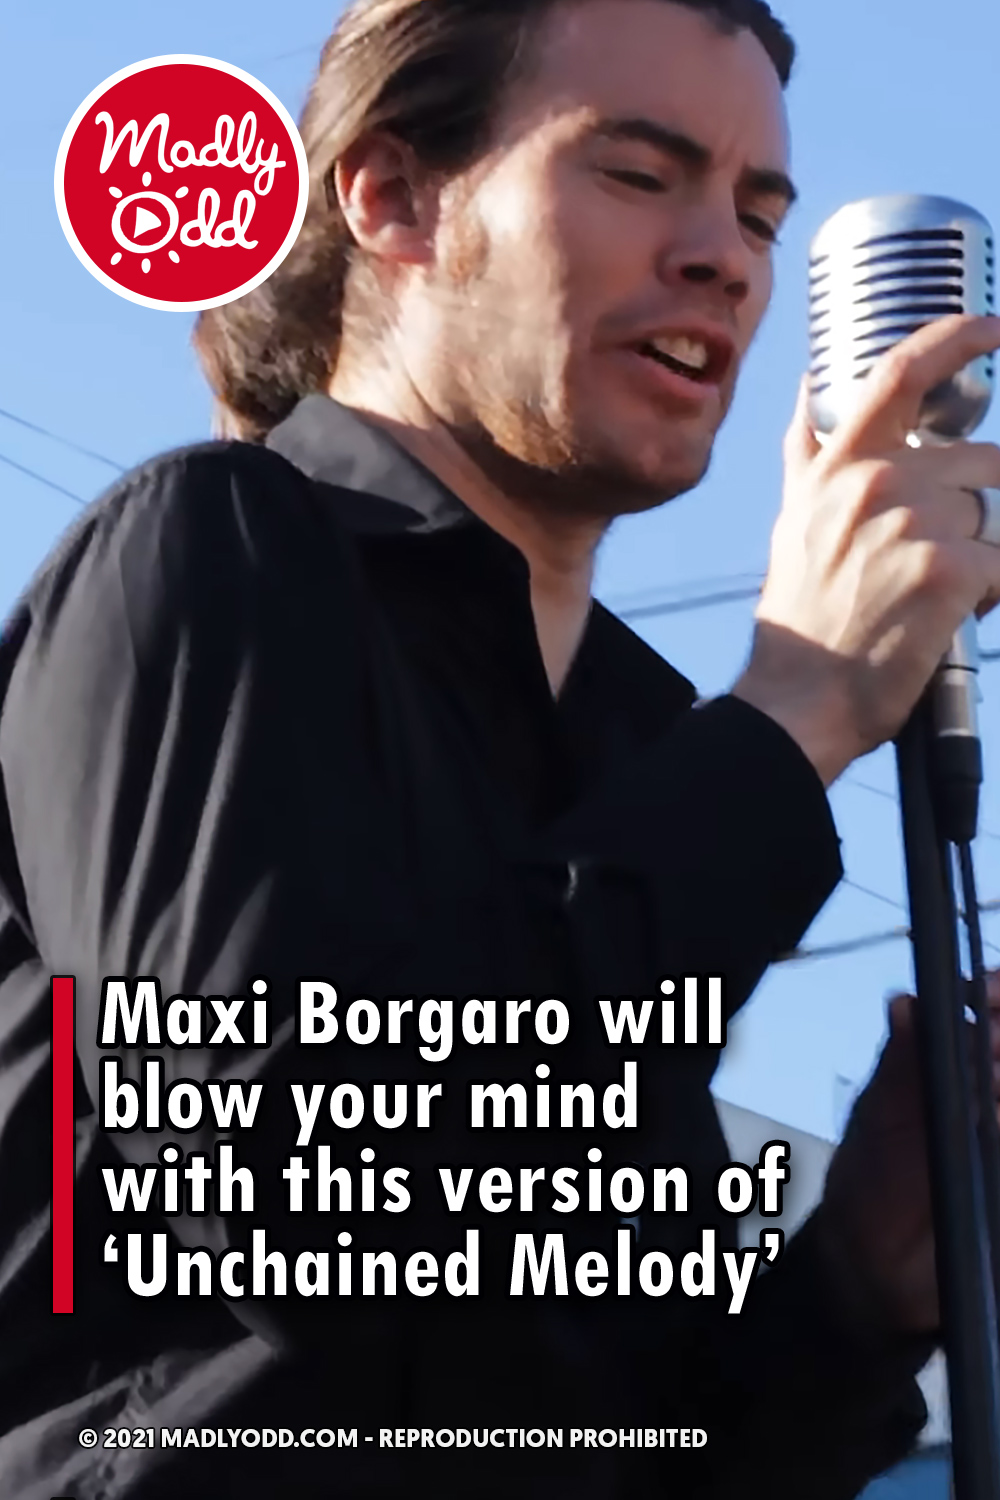 Maxi Borgaro will blow your mind with this version of ‘Unchained Melody’